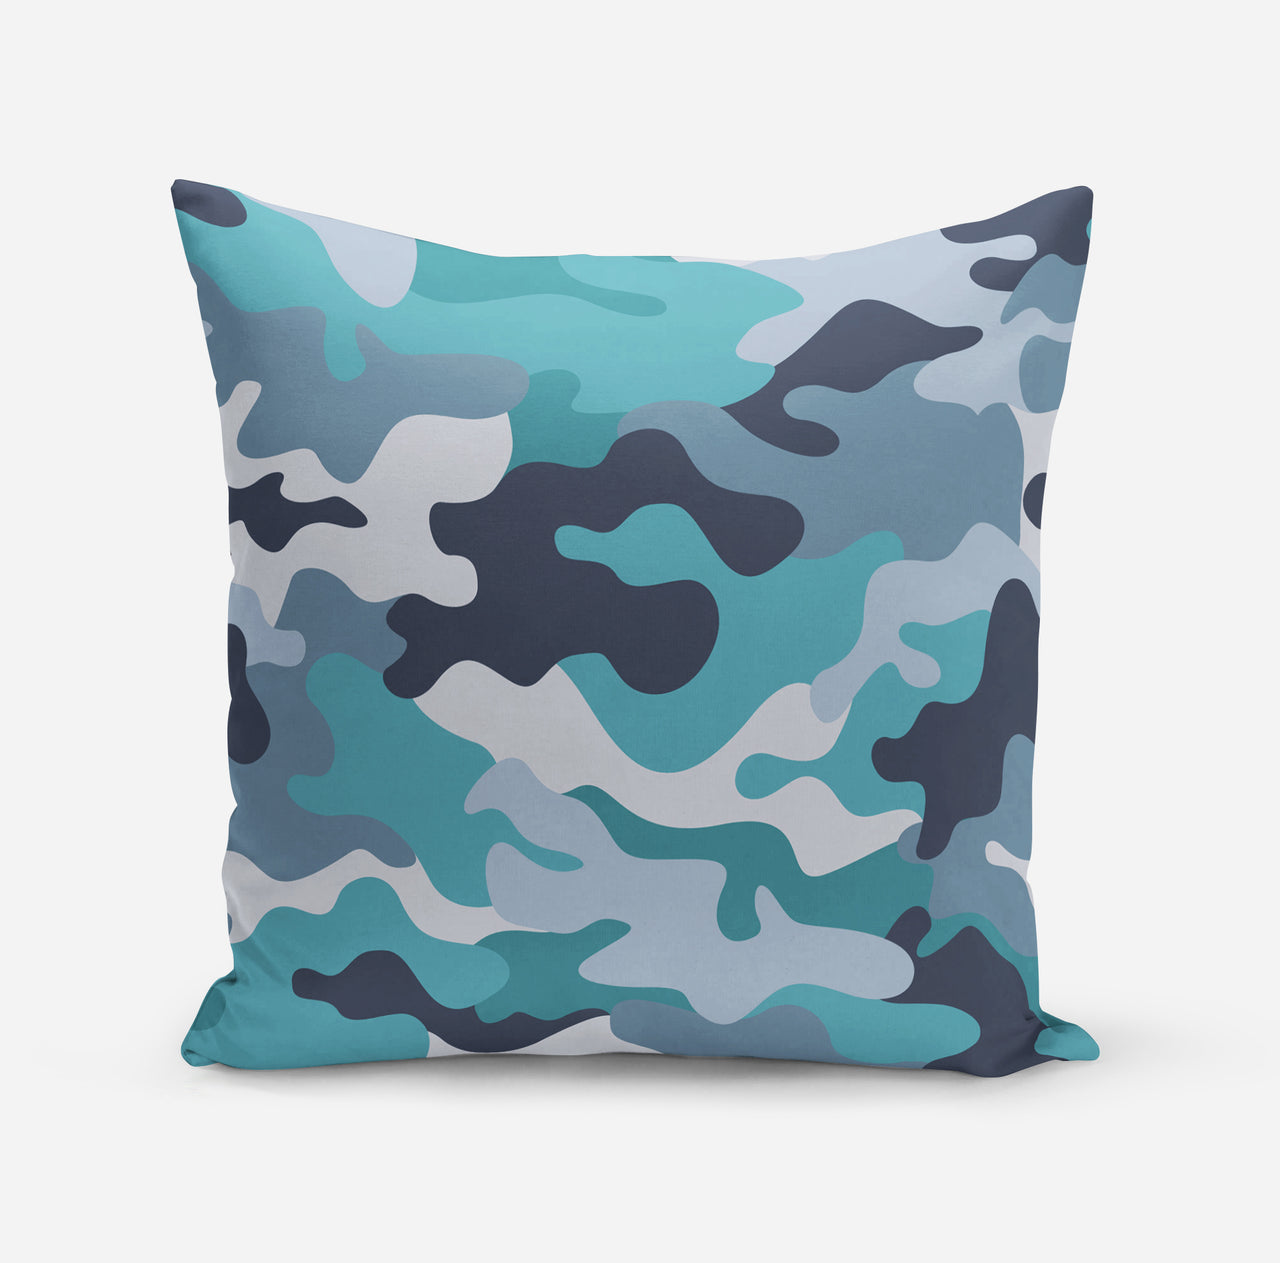 Military Camouflage Green Designed Pillows